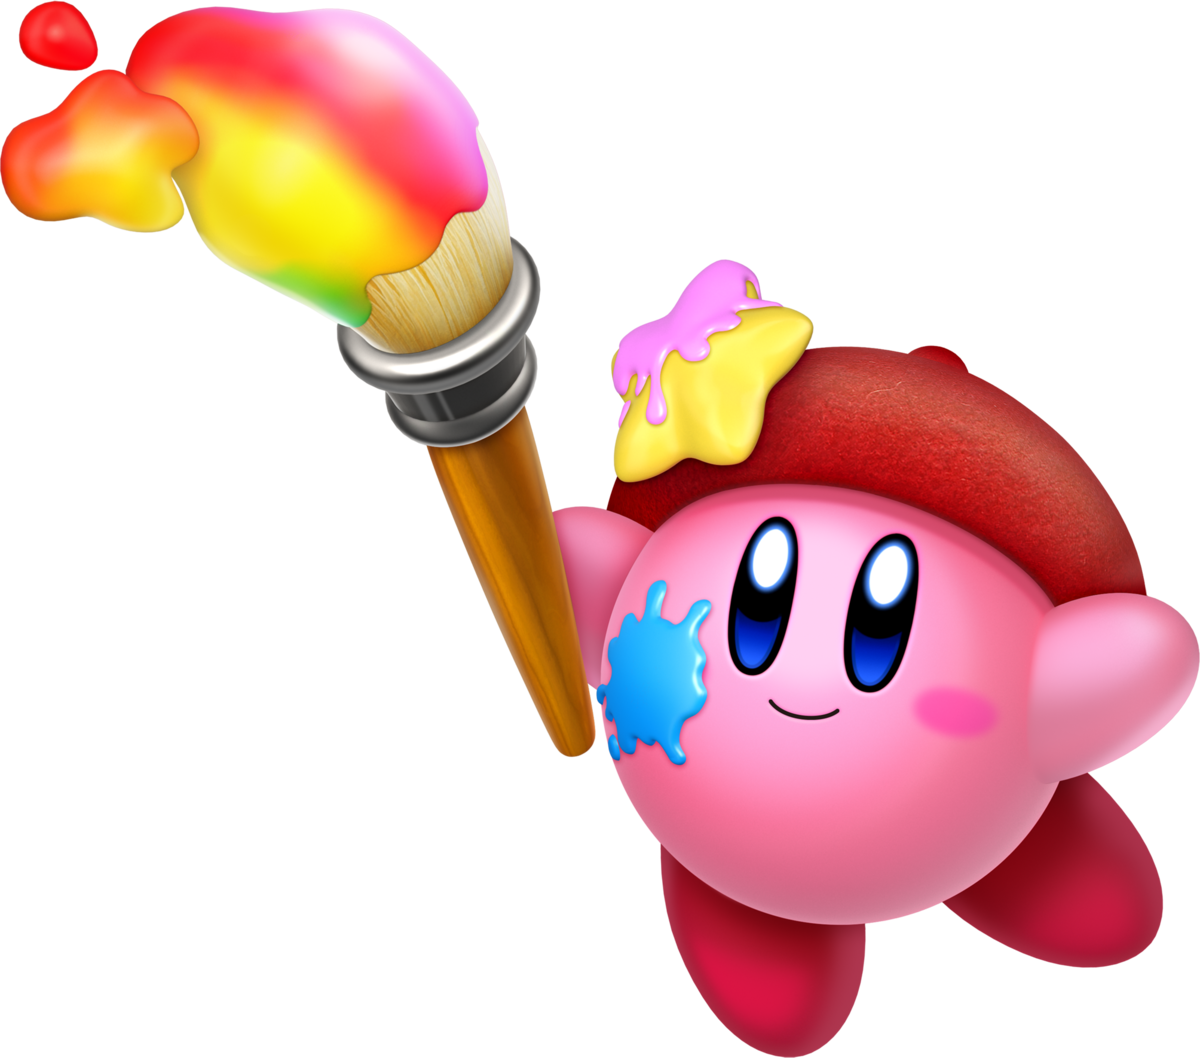 Paint Roller - WiKirby: it's a wiki, about Kirby!